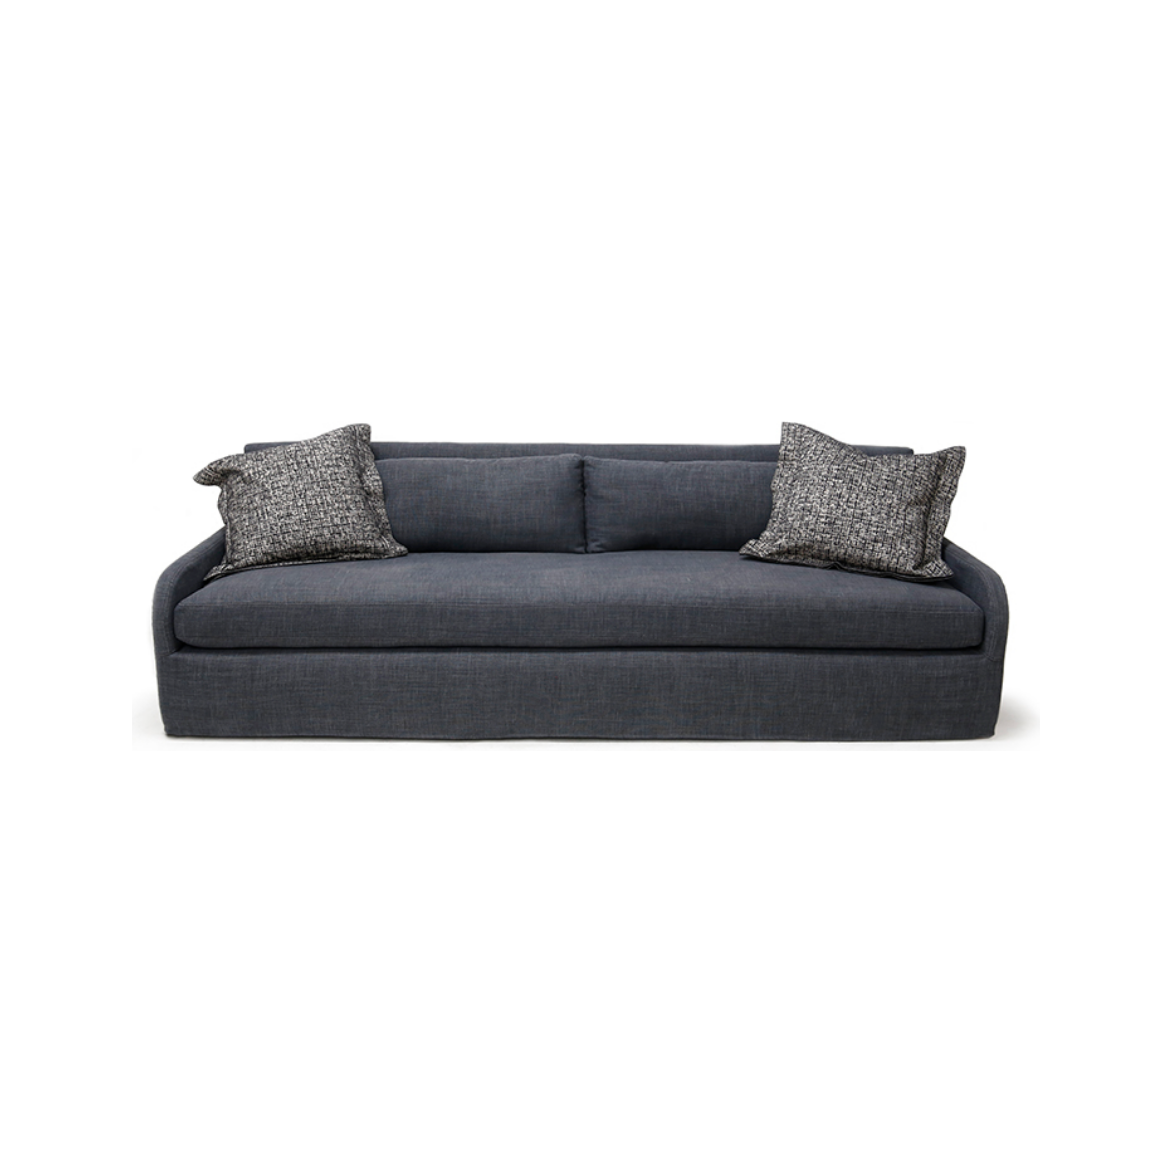 The Sophie Sofa is bench-crafted in Verellen's North Carolina atelier, and features:  •  Spring down seat construction •  Boxed style seat and back cushions •  Knife edge droopy microfiber toss pillows •  Double needle stitch detail •  2″ high legs